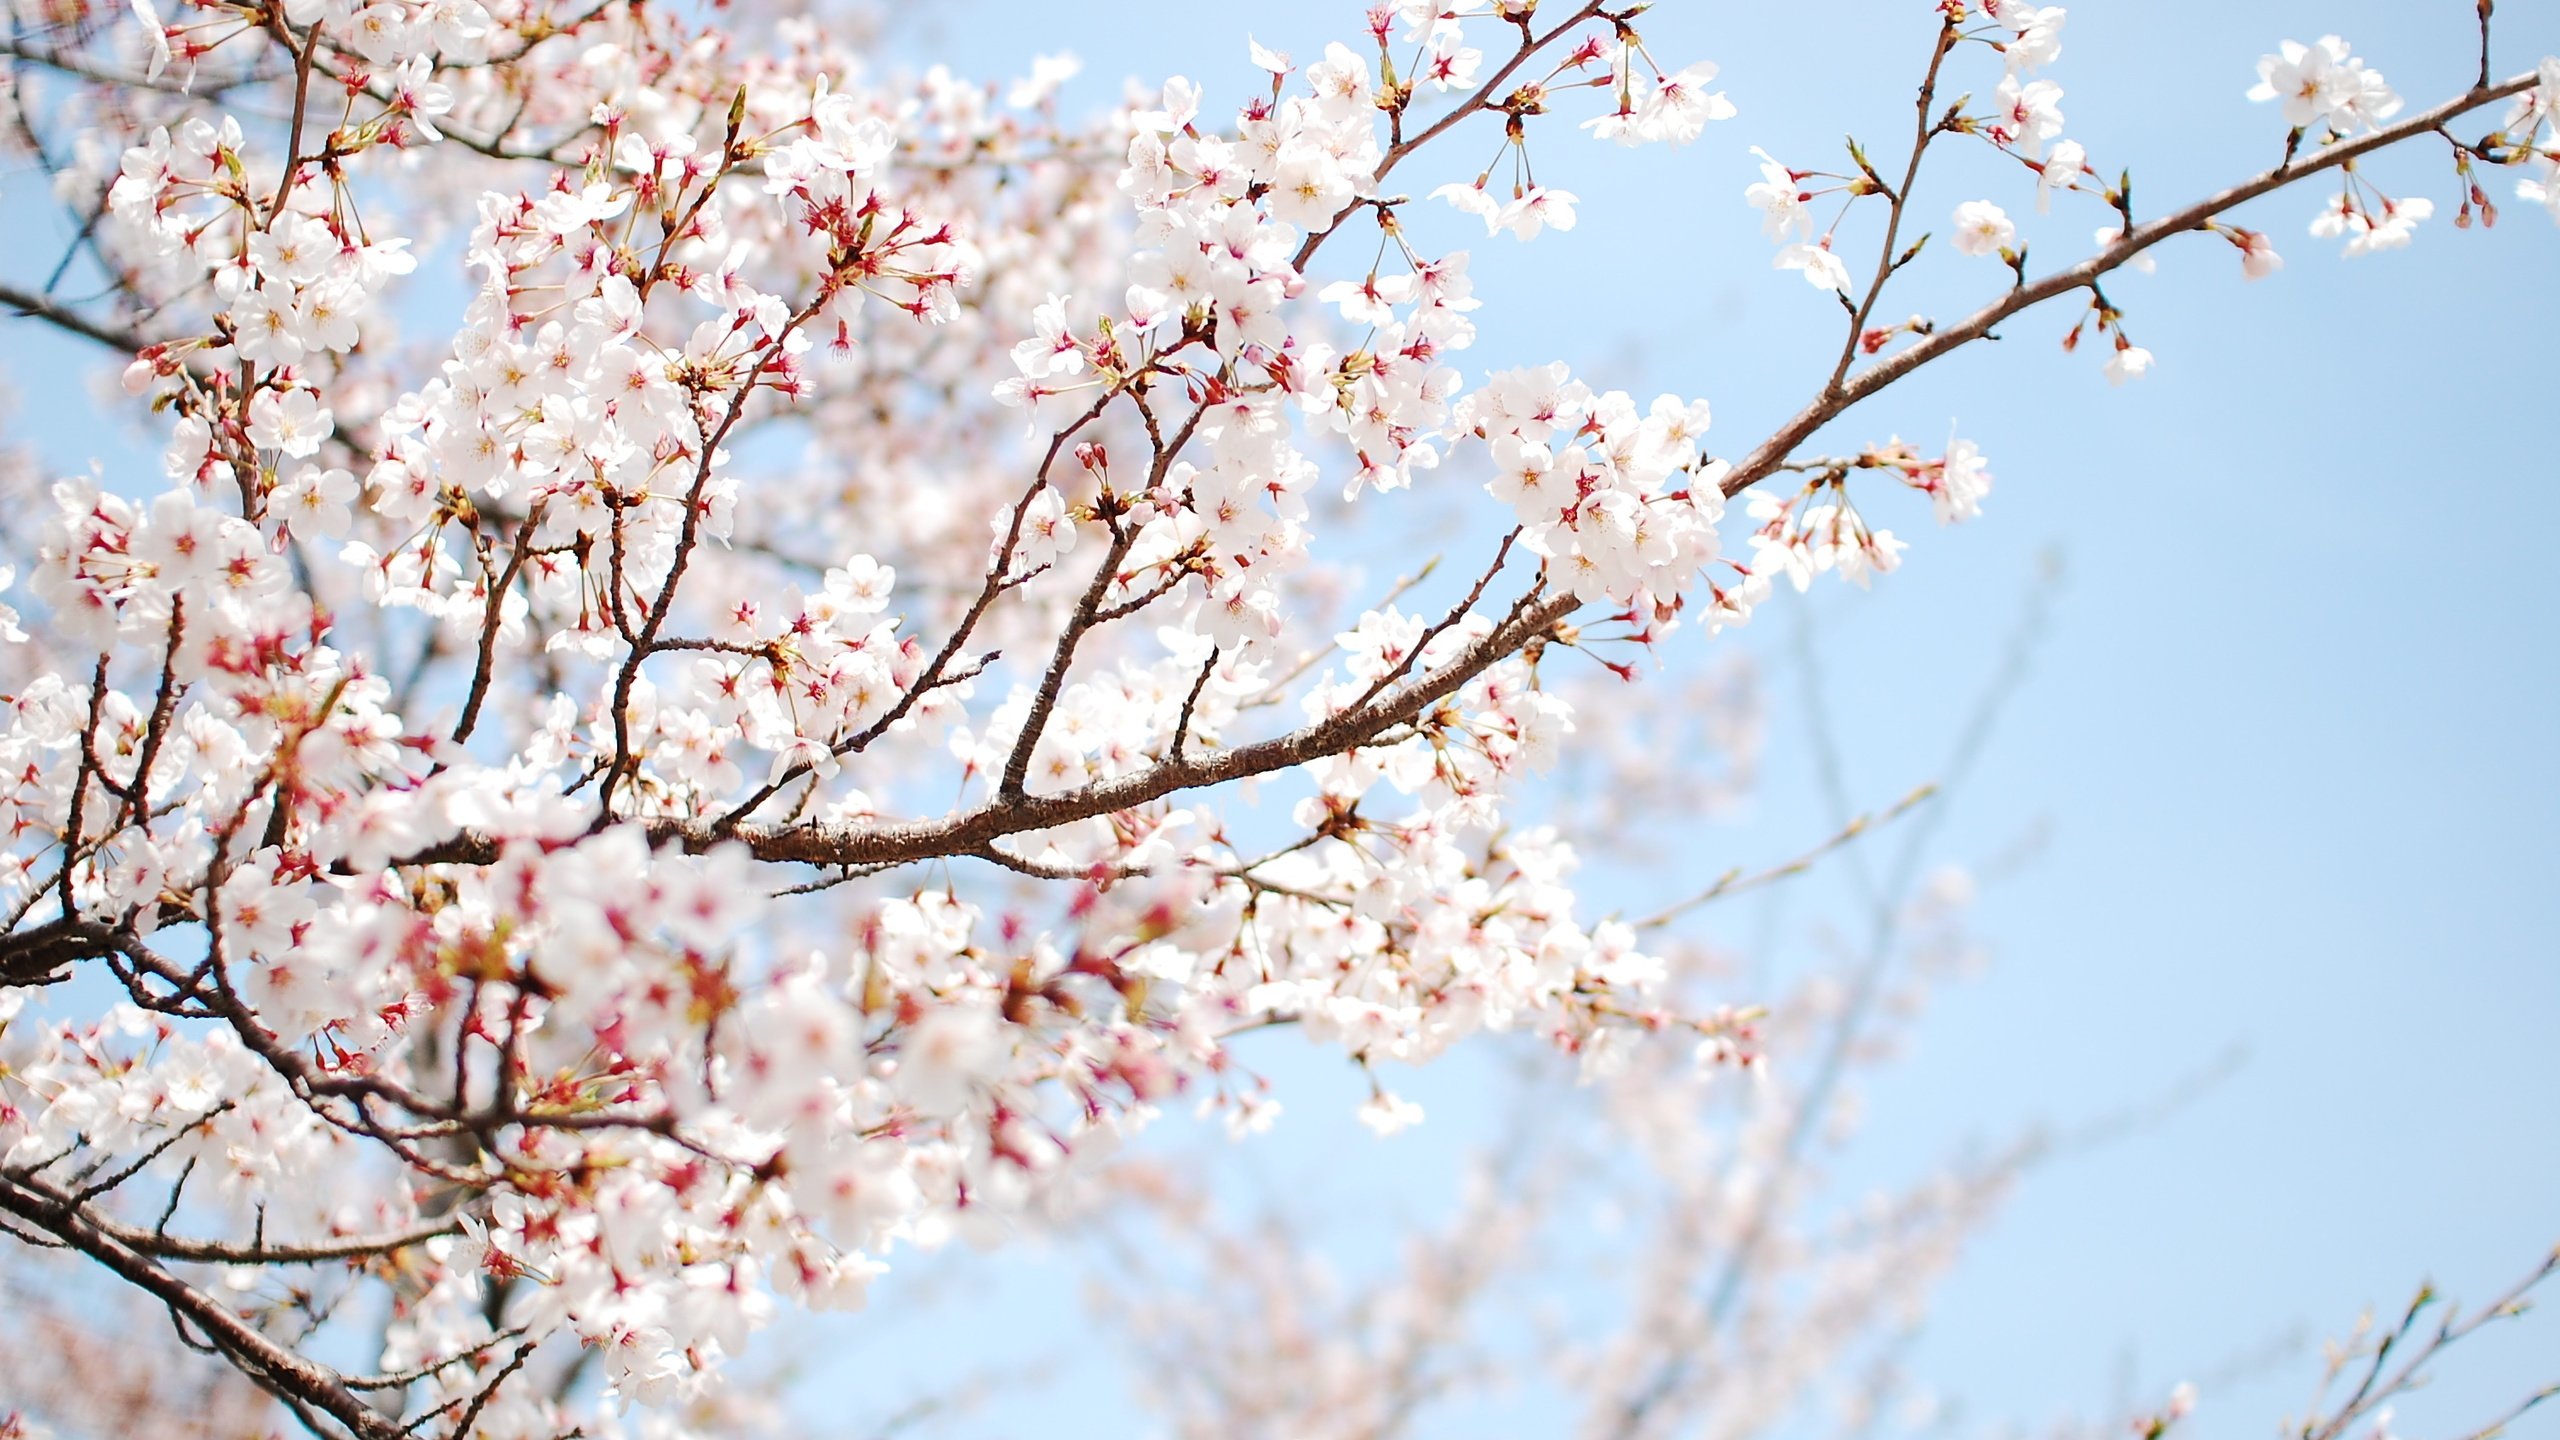 Wallpapers Of The Day Cherry Blossom 2560x1440 Cherry